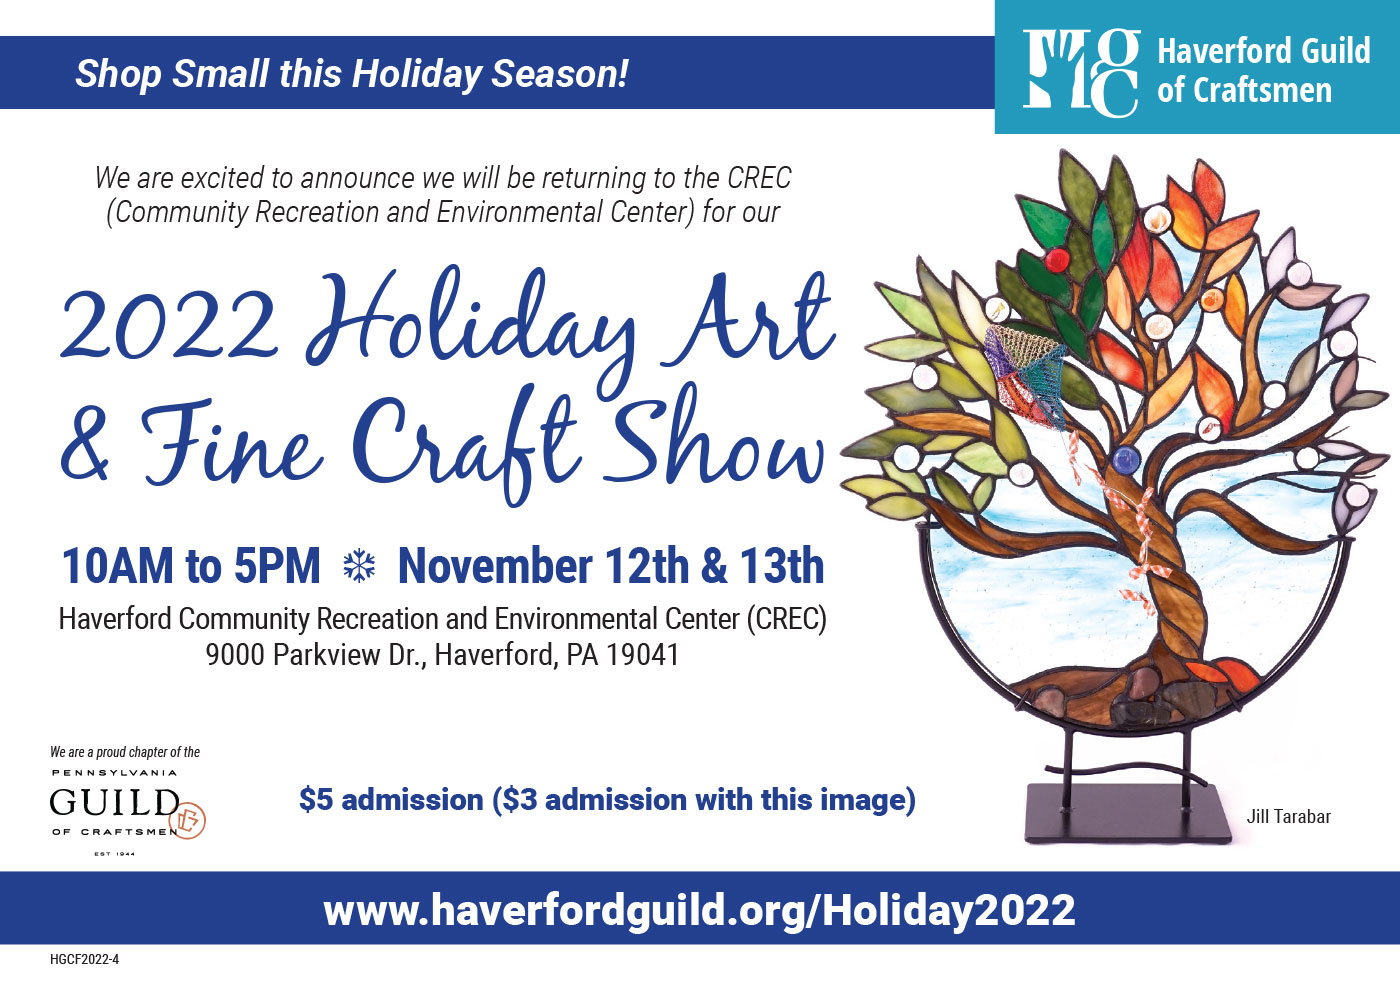 2022 Holiday Art and Craft Show